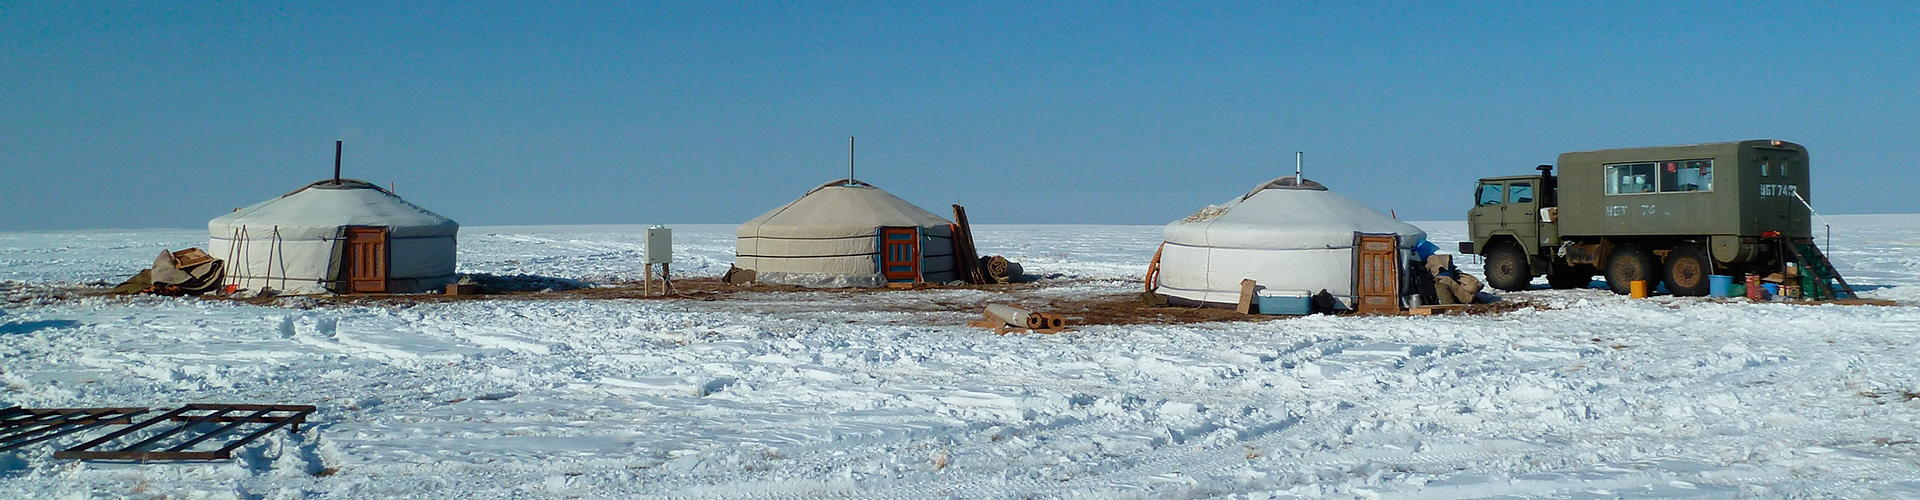 Exploration Camp in Dariganga during the winter.